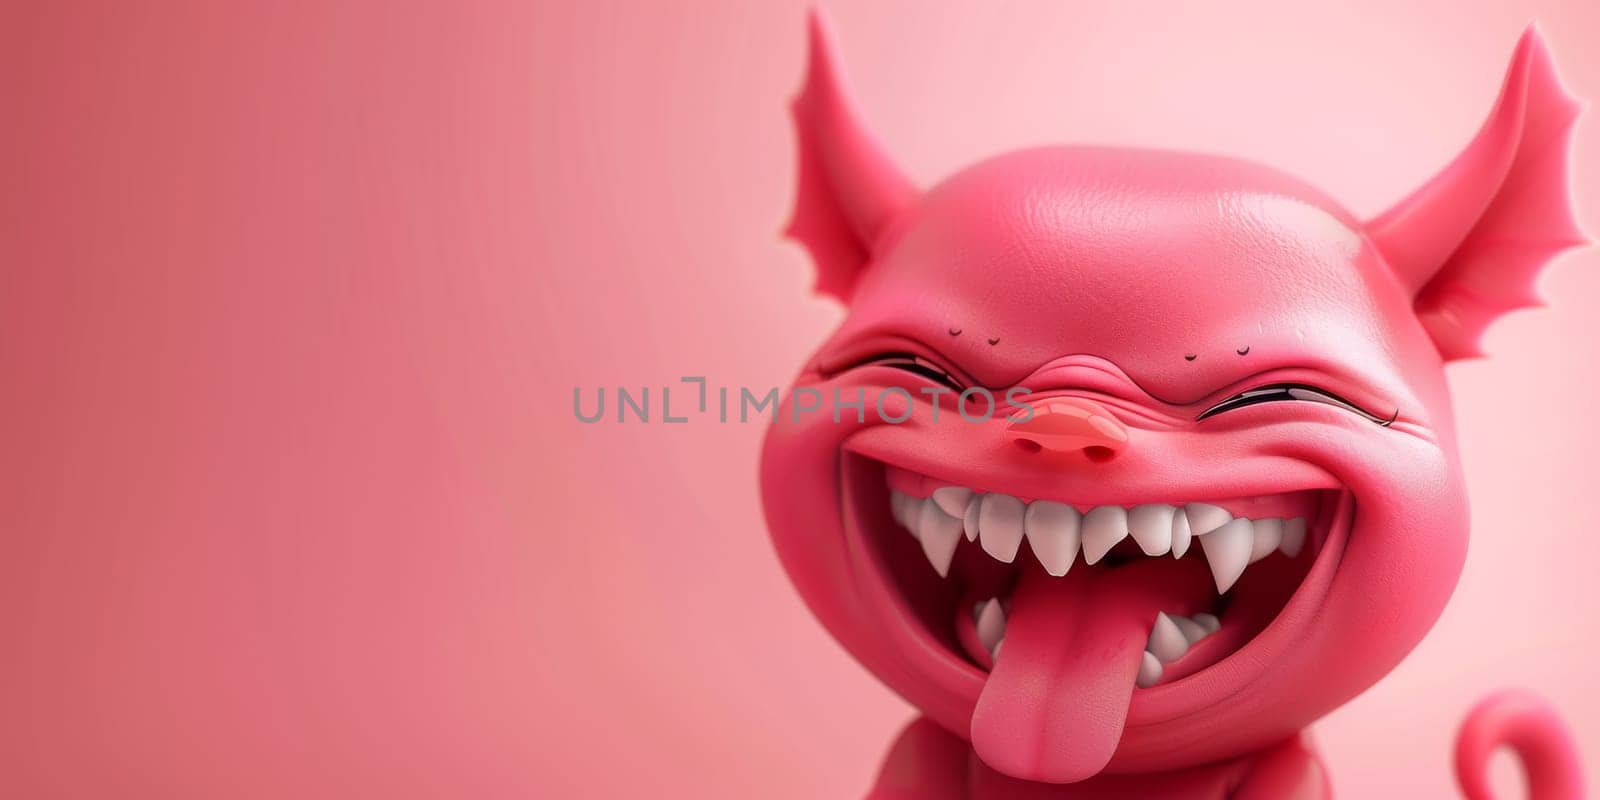 Little, baby devil smiling and sticking out his tongue, isolated on a bright pink background with copy space